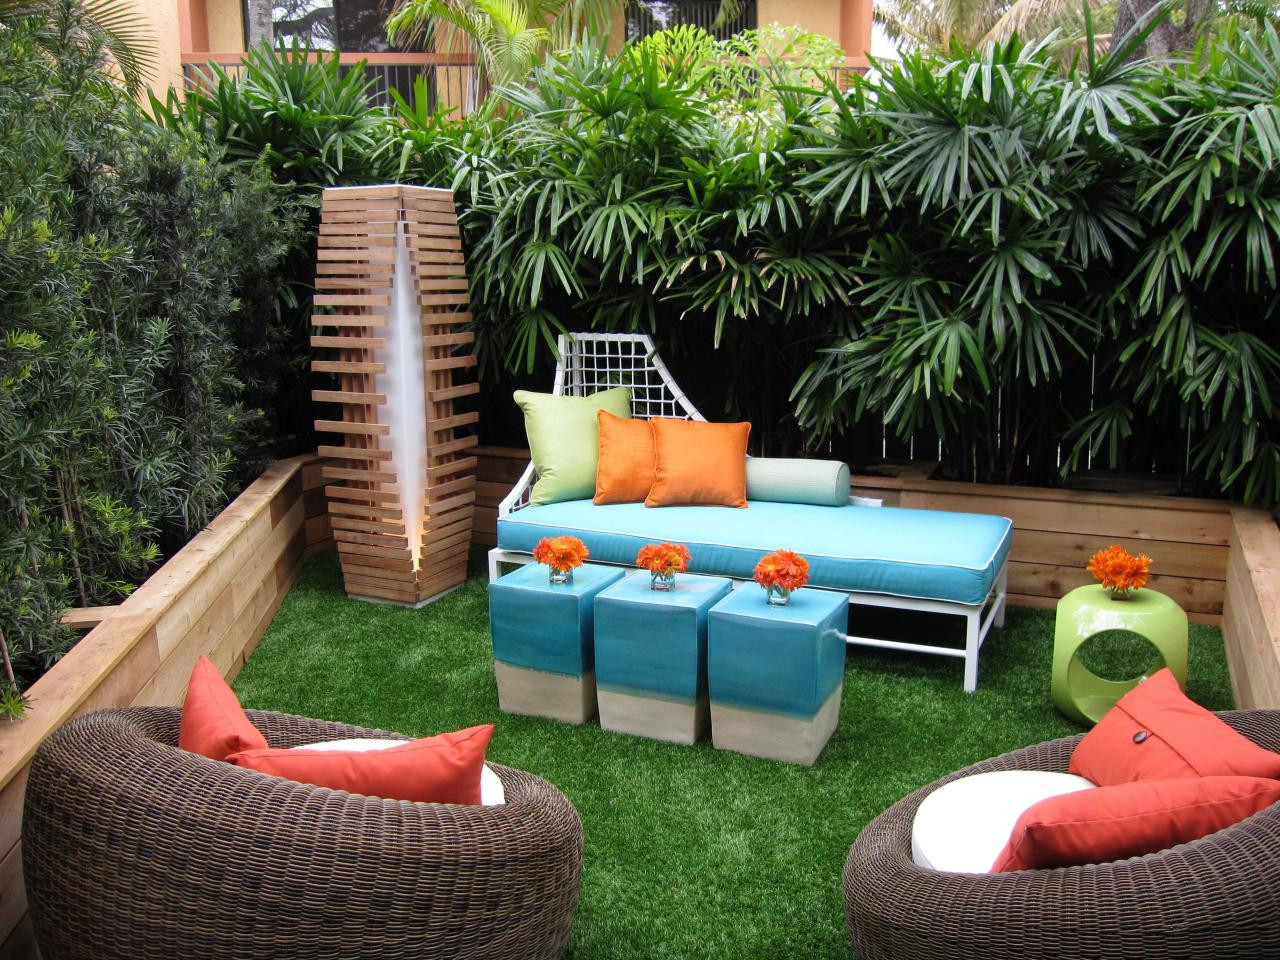 Create Privacy In Backyard
 12 Clever Ways to Create More Privacy in Your Backyard